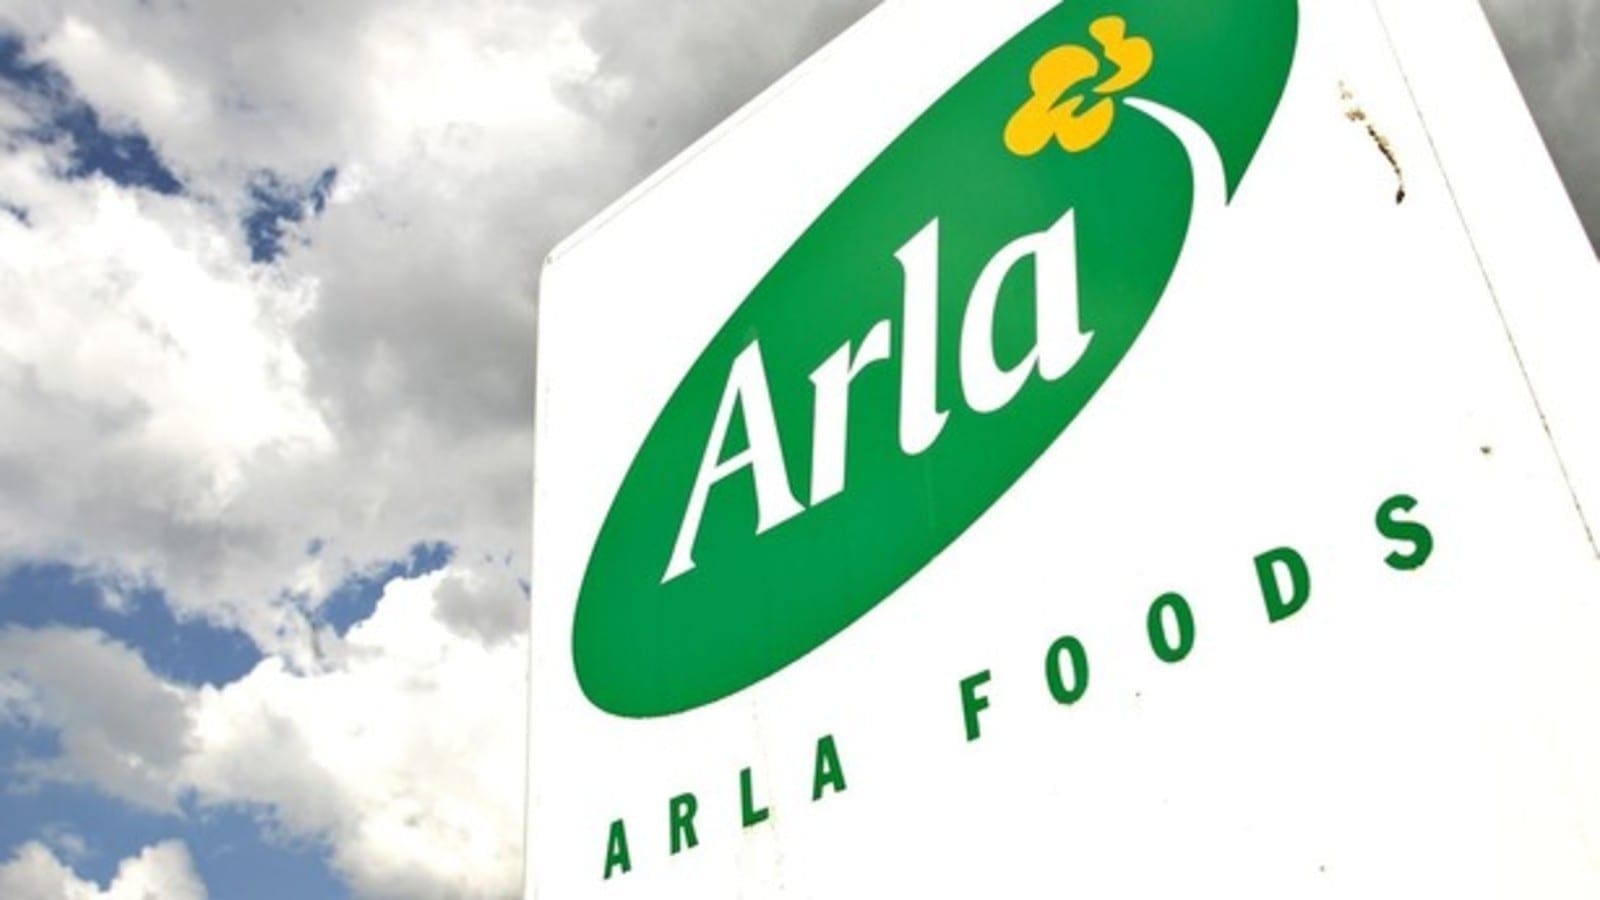 Arla Foods Ingredients takes full control of MV Ingredients as Volac exits joint venture